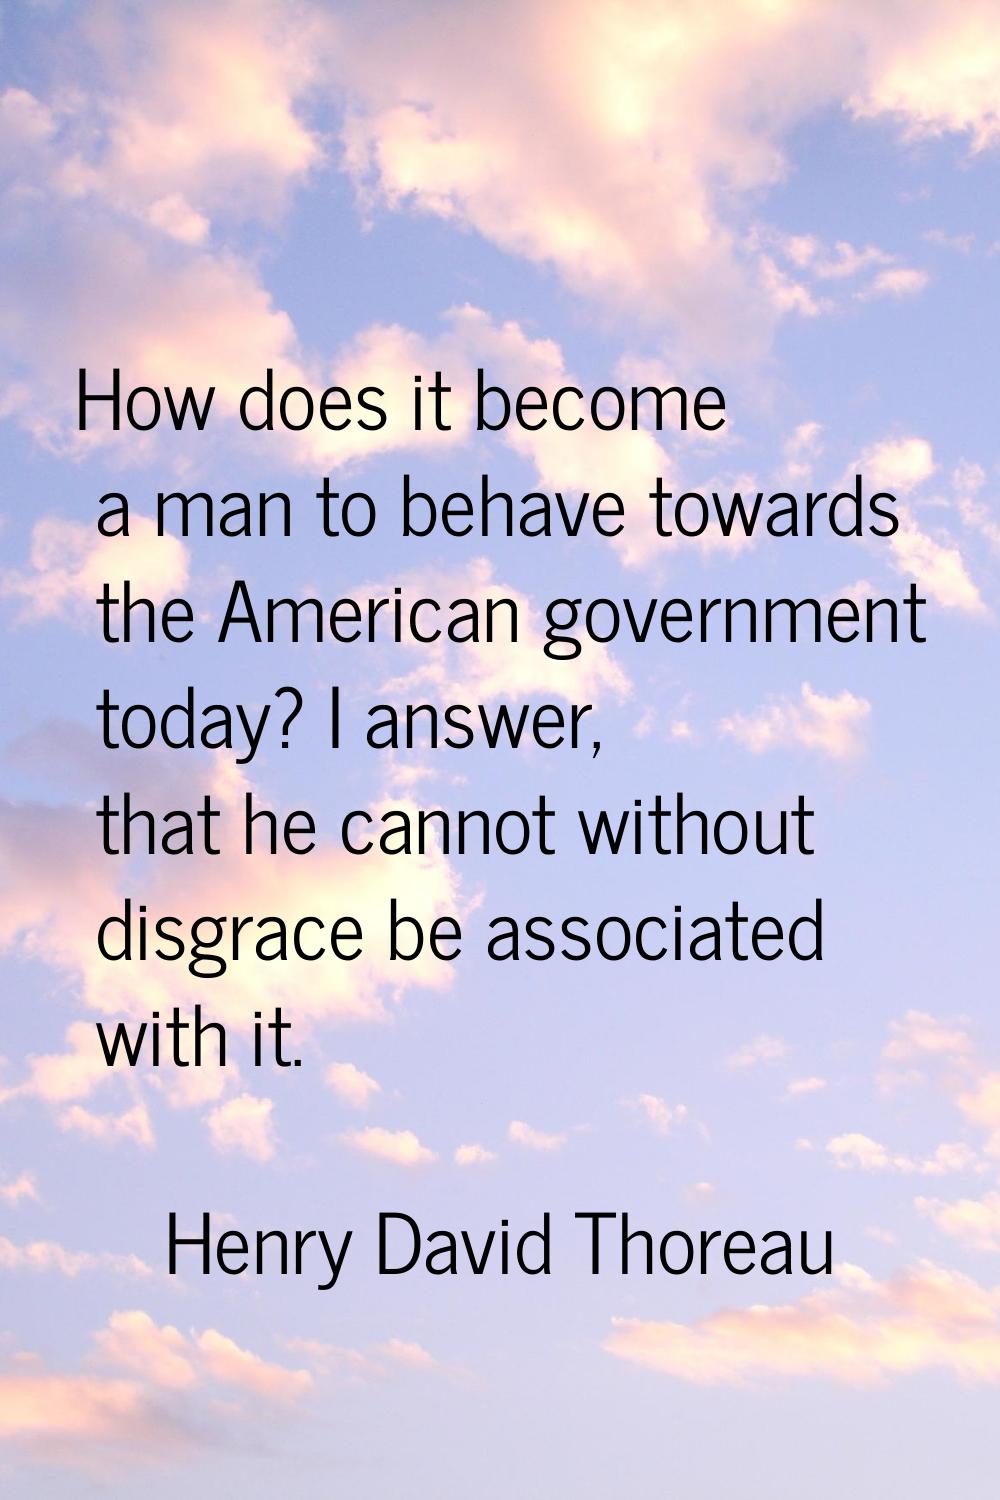 How does it become a man to behave towards the American government today? I answer, that he cannot 